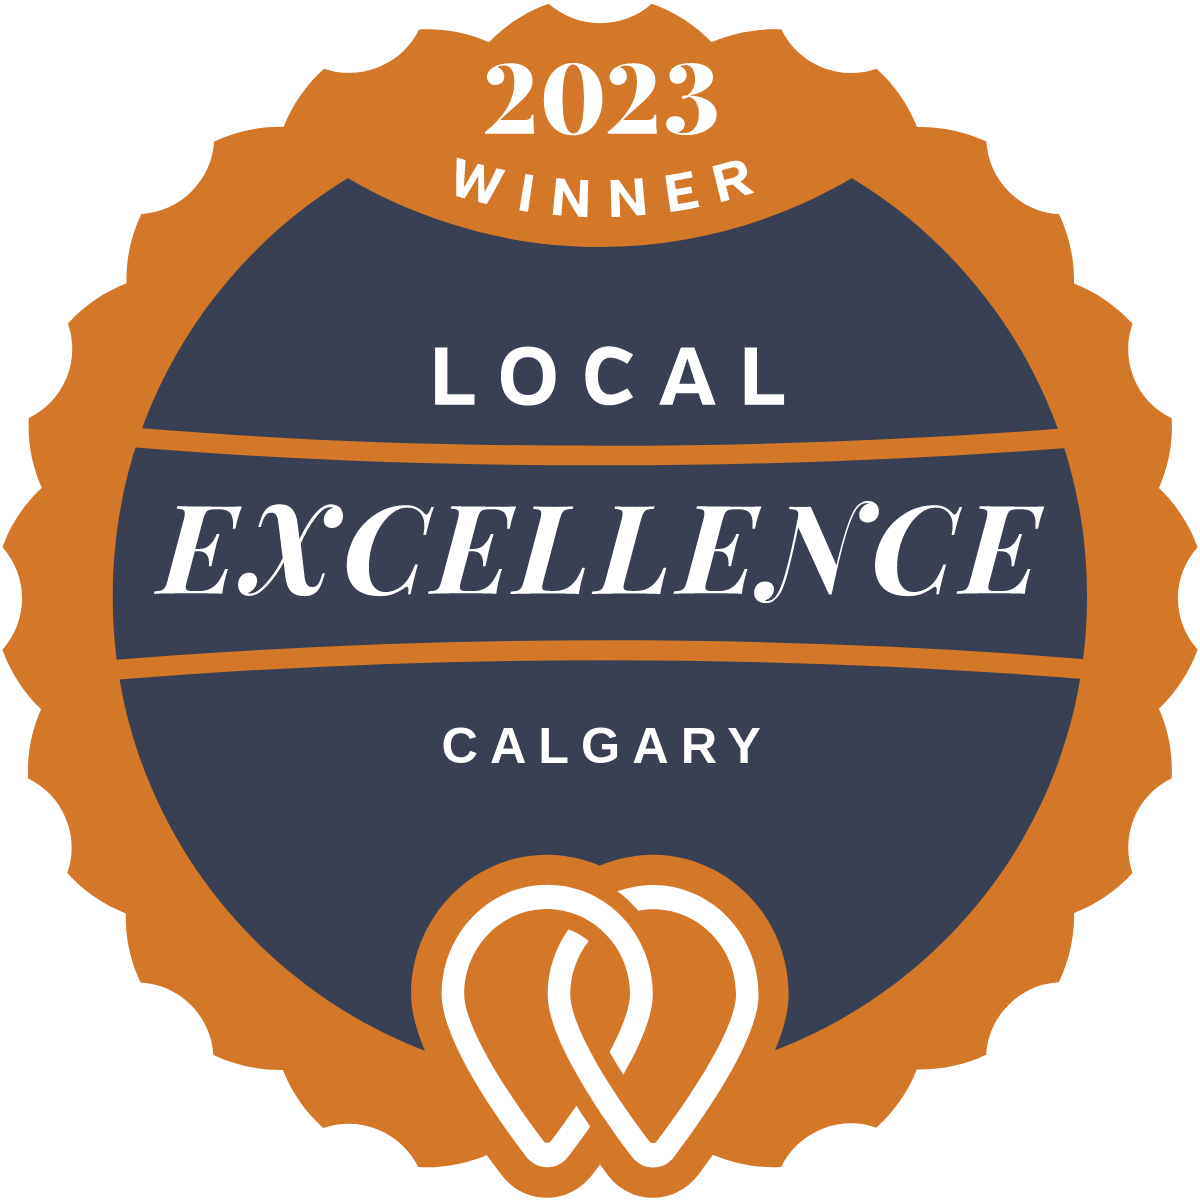 2023 Winner Local Excellence Calgary - UpCity